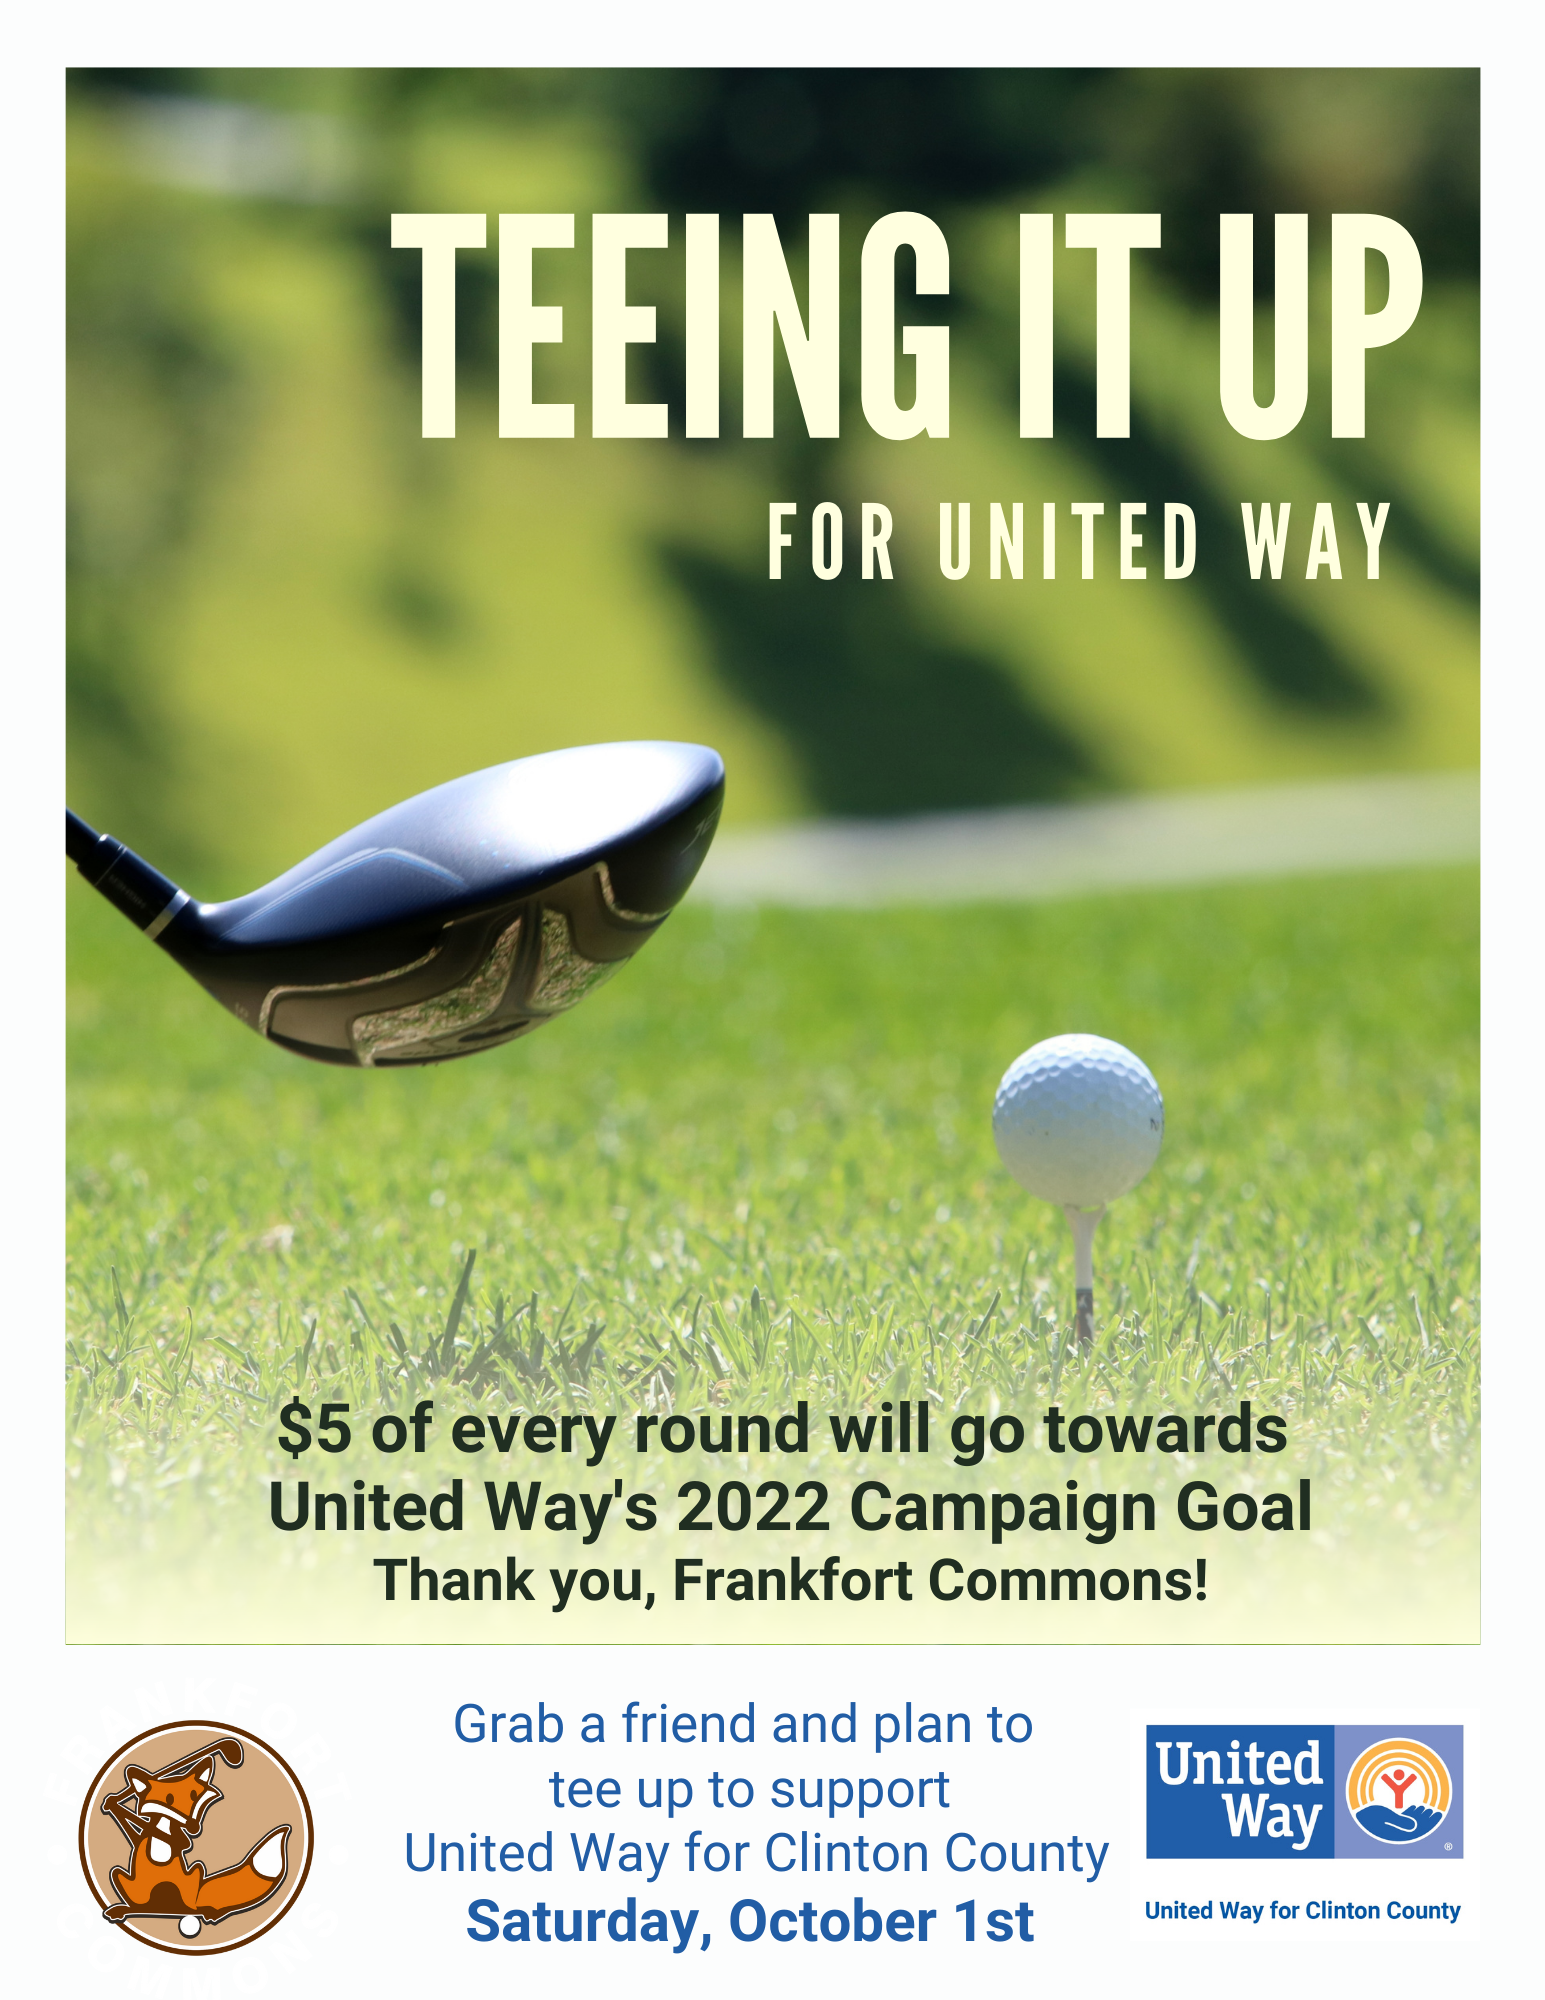 Play Golf and Support United Way Saturday, October 1st